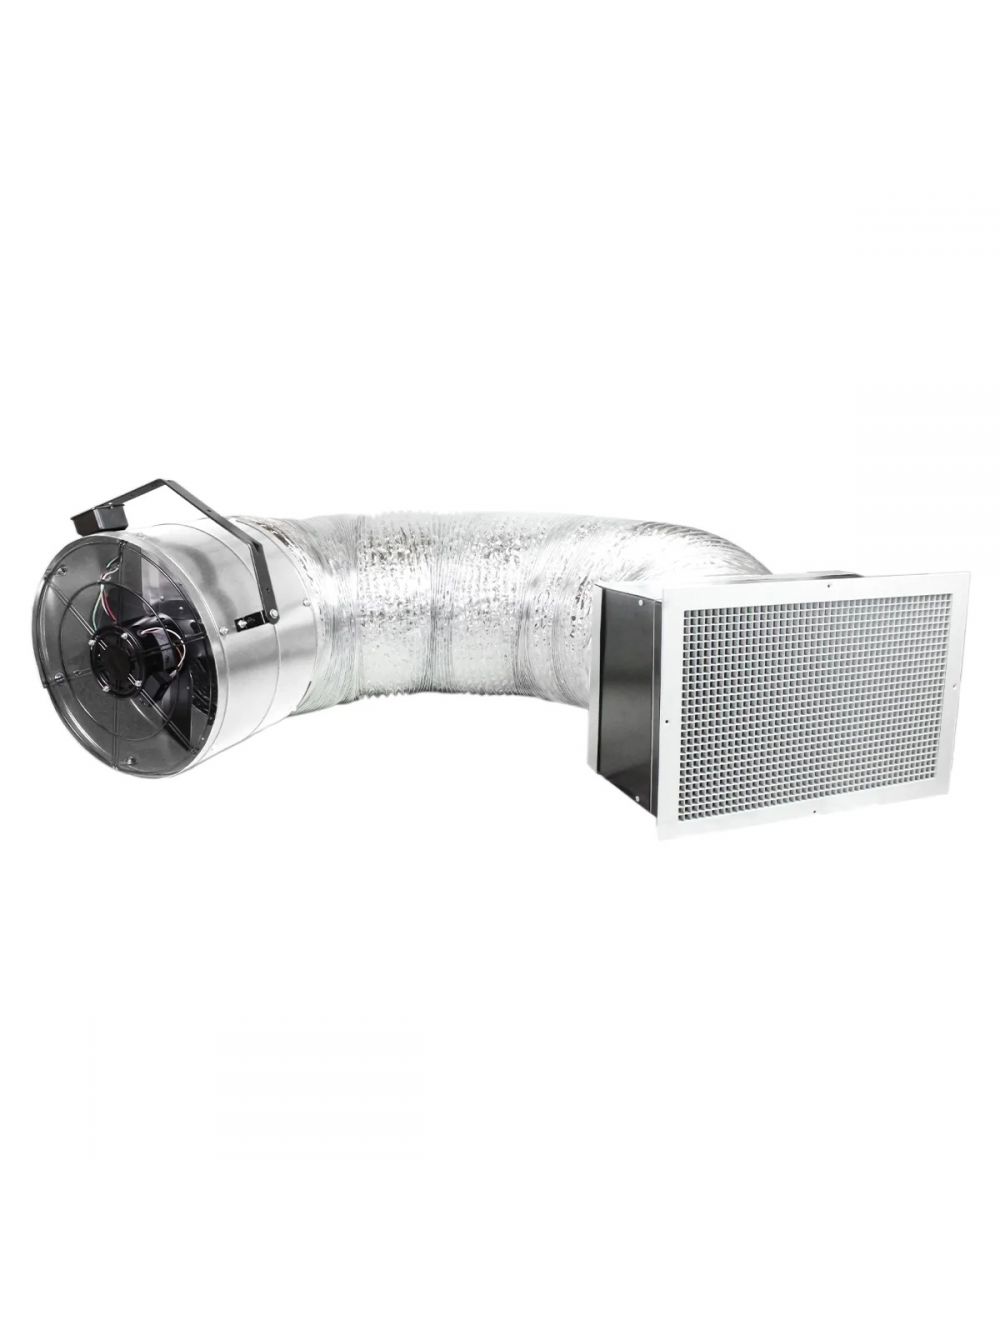 MaxxAir 18 In. 2-speed Modern Whole House Fan With Ceiling Grid CX1801